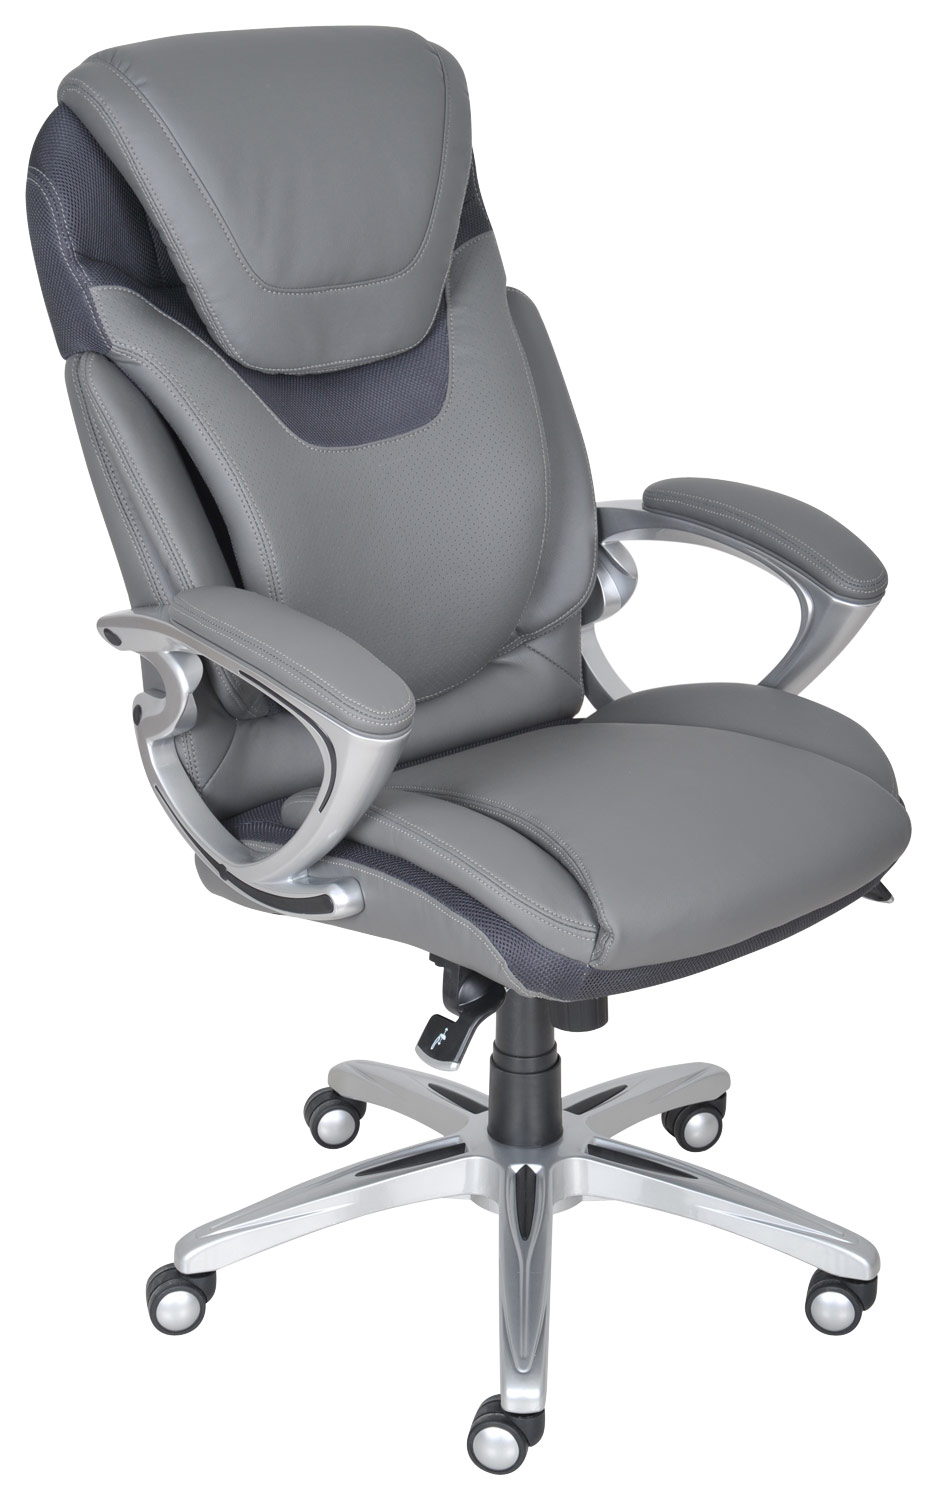 Angle View: Studio Designs - Deluxe Task Chair - Pink/Gray